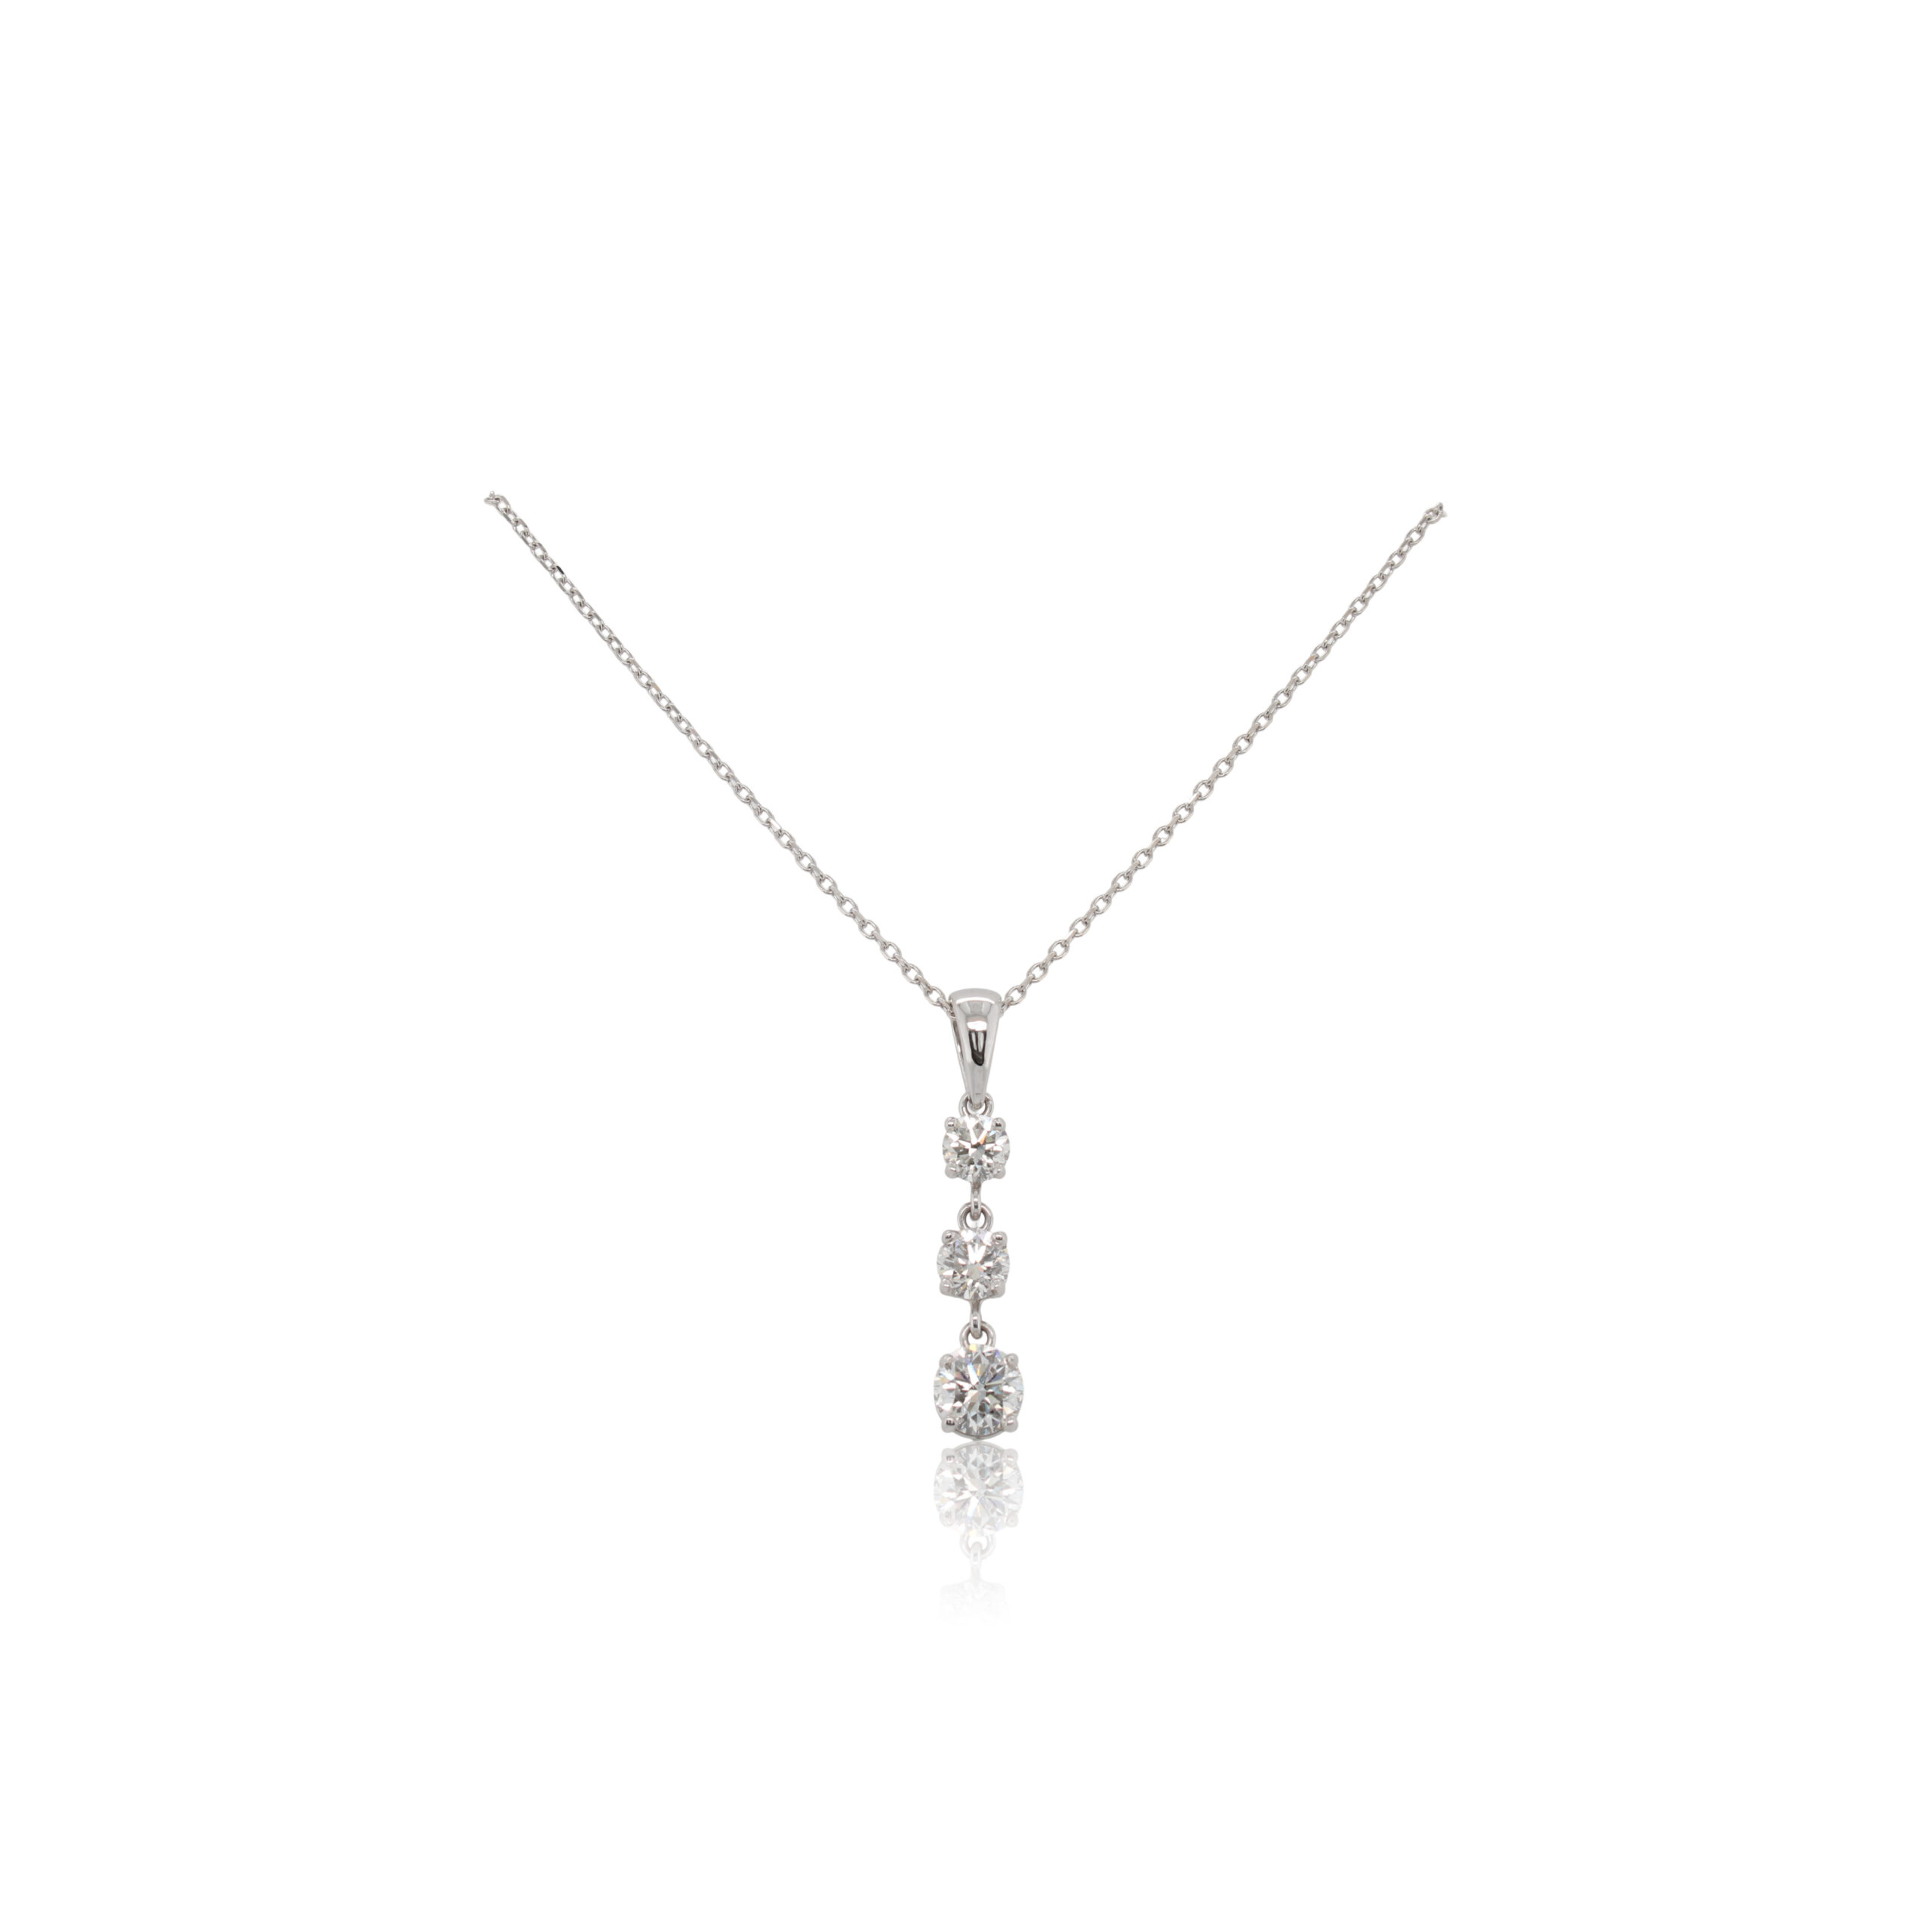 This necklace by R.F. Moeller Designs is crafted from 18k white gold and features 0.99 total carats of diamonds.